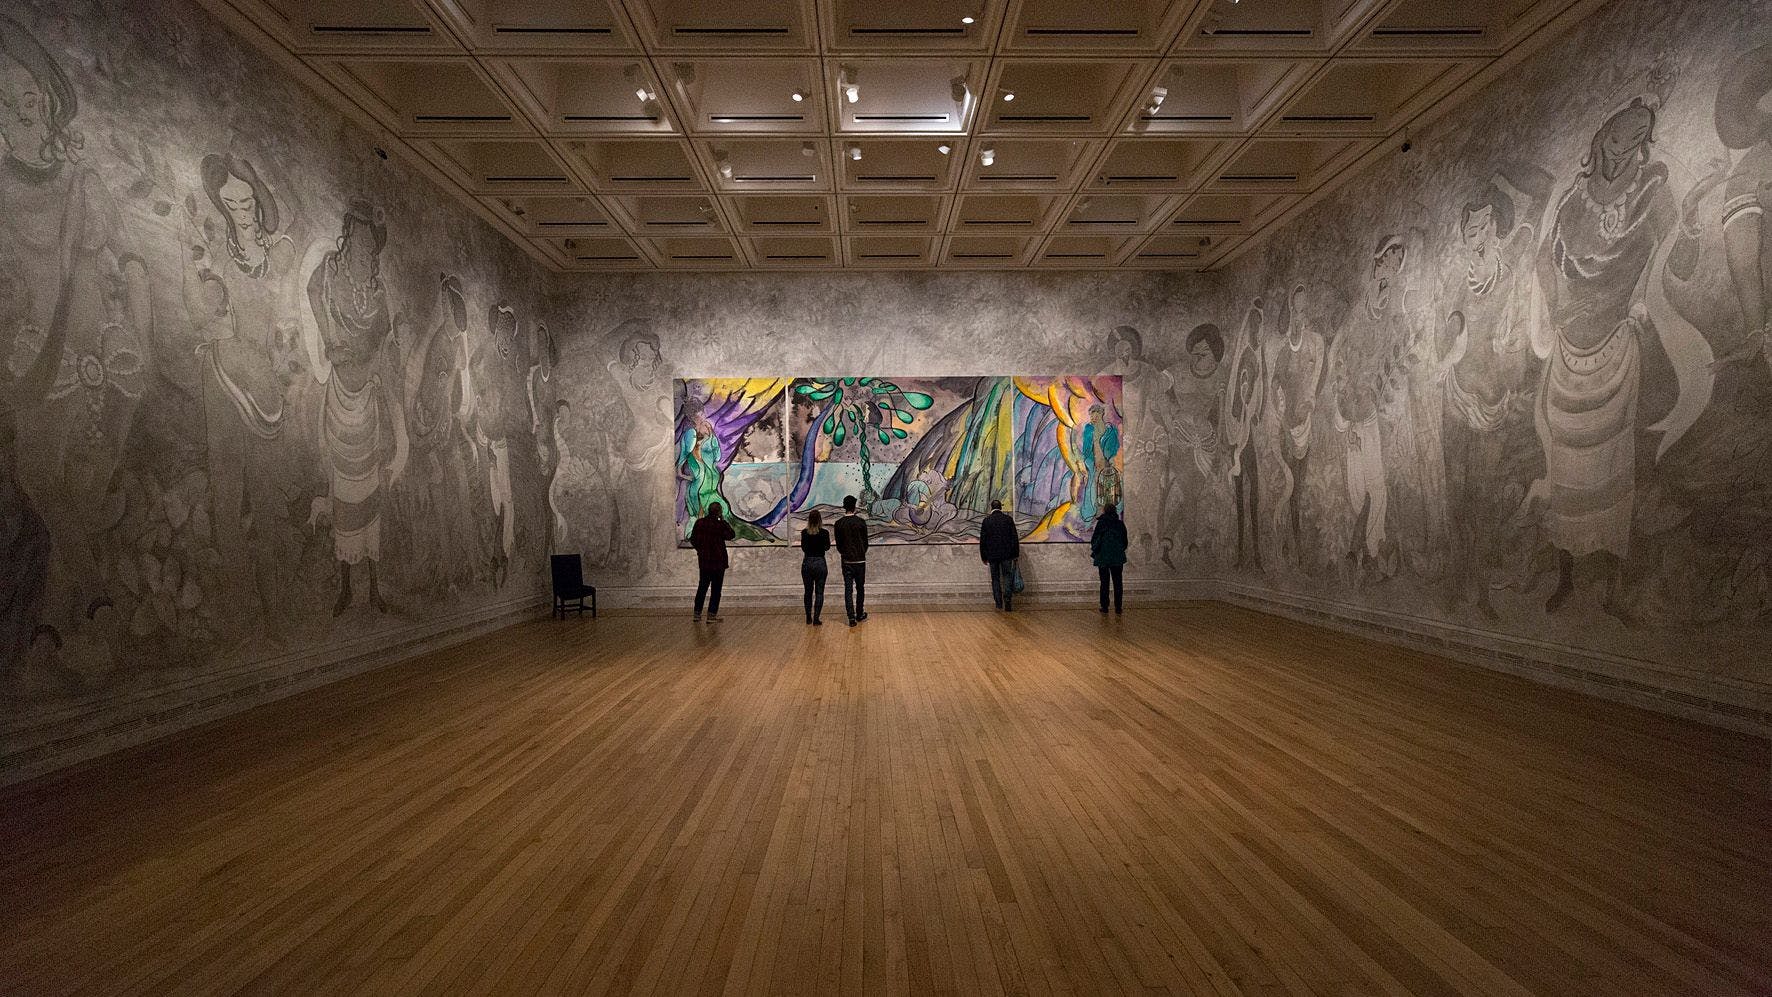 Installation view of the exhibition, Chris Ofili: Weaving Magic, at The National Gallery in London, dated 2017.